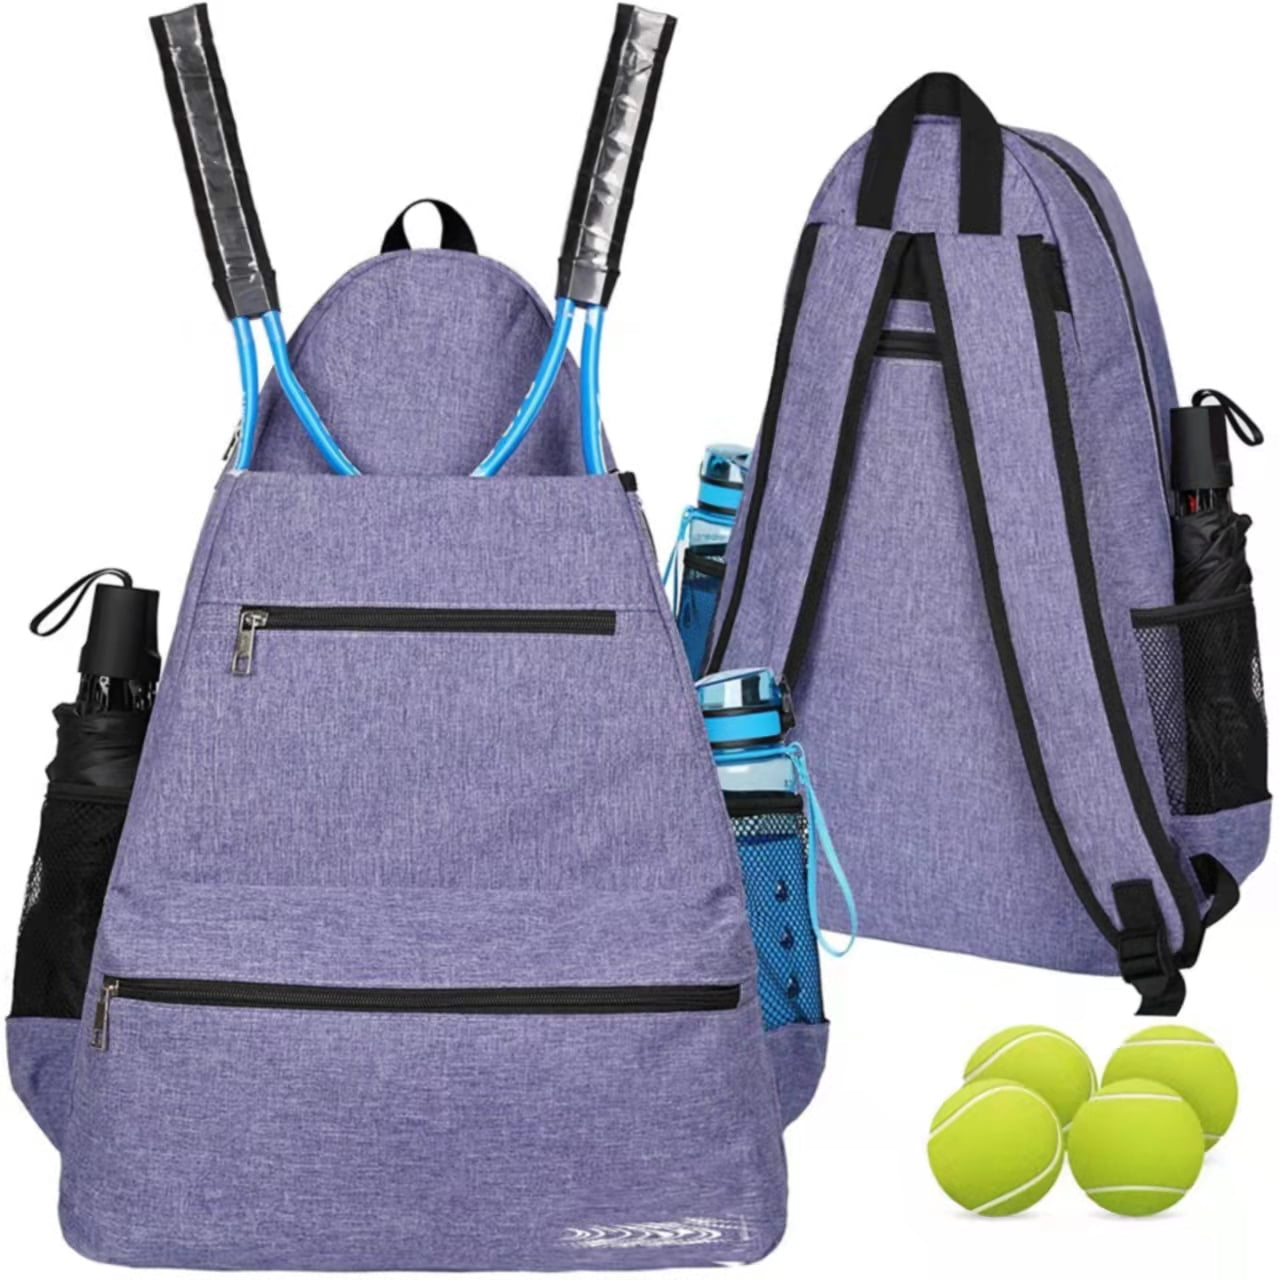 Large Tennis Backpack for Men and Women to Hold Tennis Racket,Pickleball Paddles Tennis Racquet Holder Bag Tennis Bag Tennis Backpack Squash Racquet,Balls and Other Accessories Badminton Racquet 